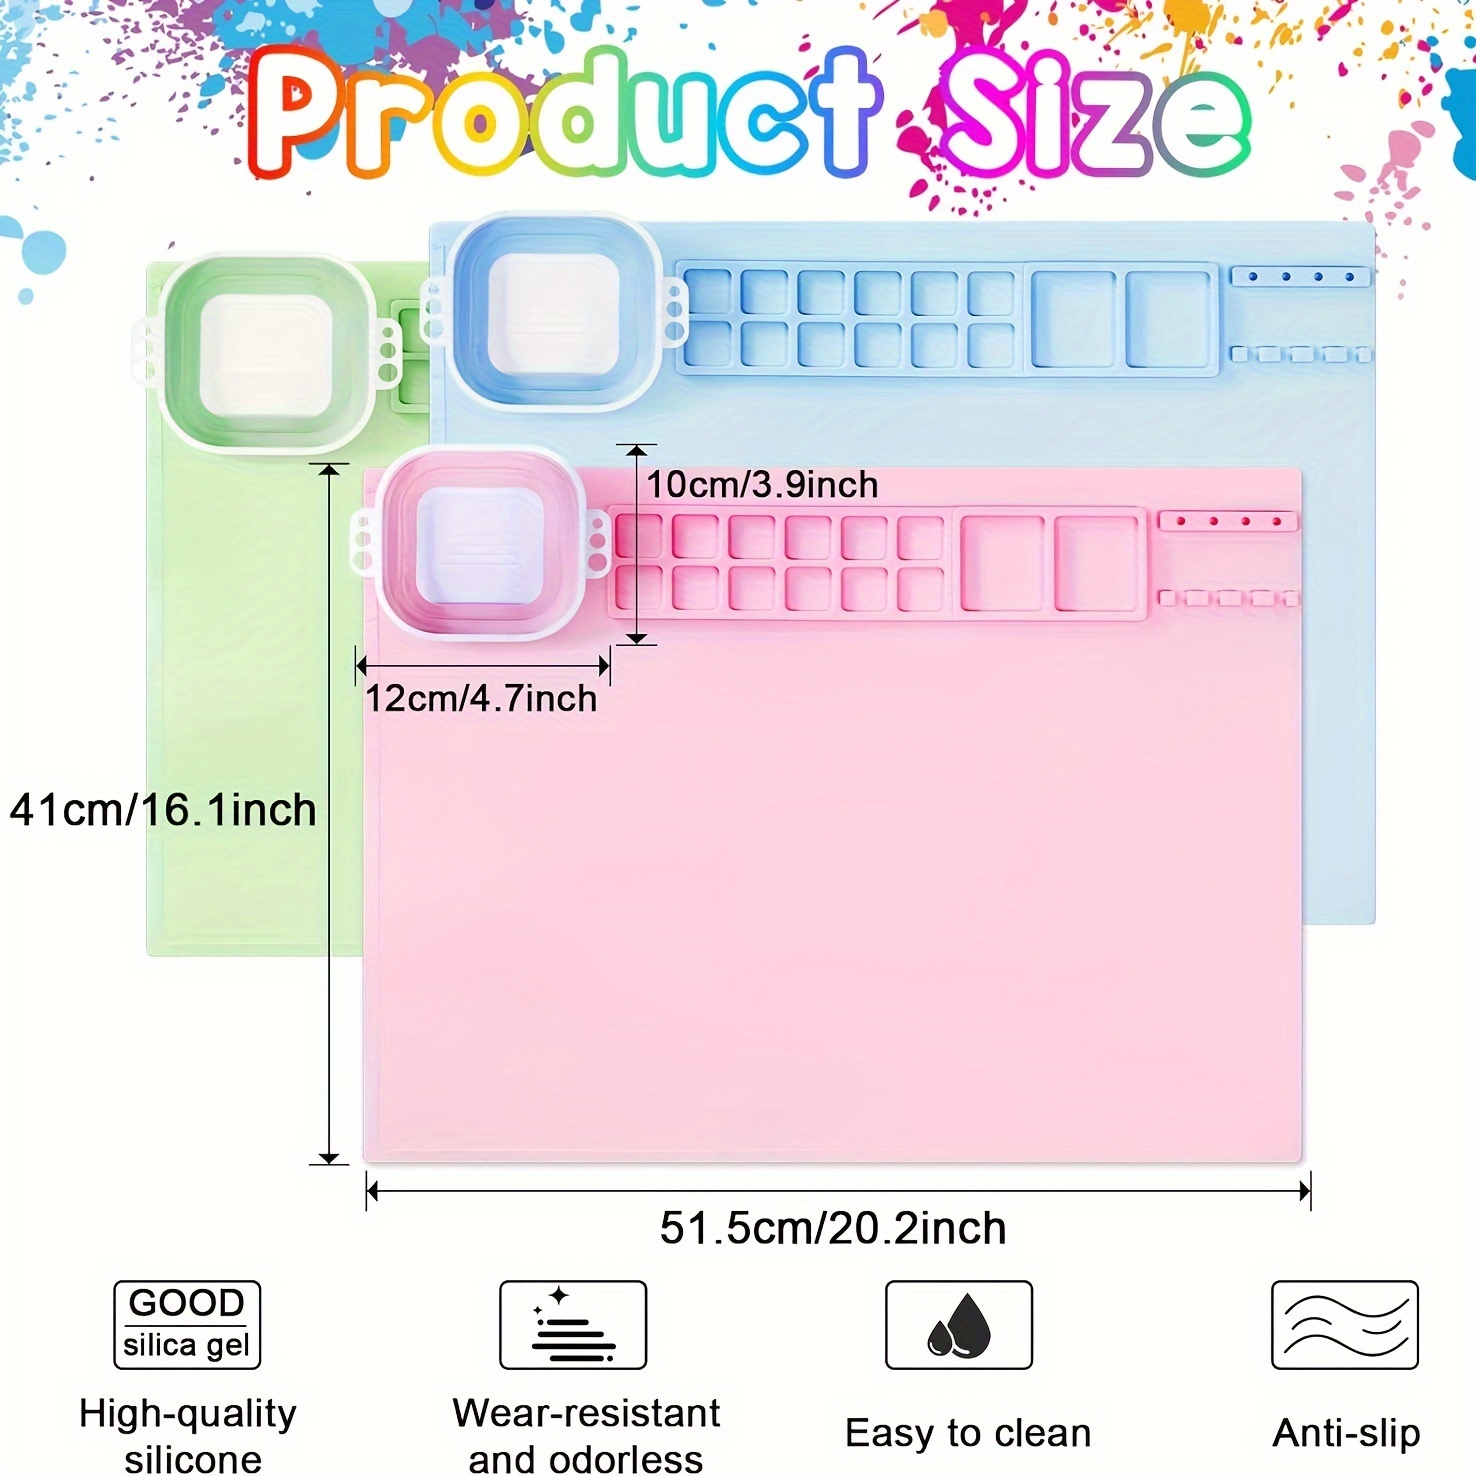  Silicone Painting Mat - 19.7X15.7 Silicone Art Mat with 1  Water Cup for Kids - Silcone Craft Mat has12 Color Dividers - 2 Paint  Dividers (Purple) : Arts, Crafts & Sewing